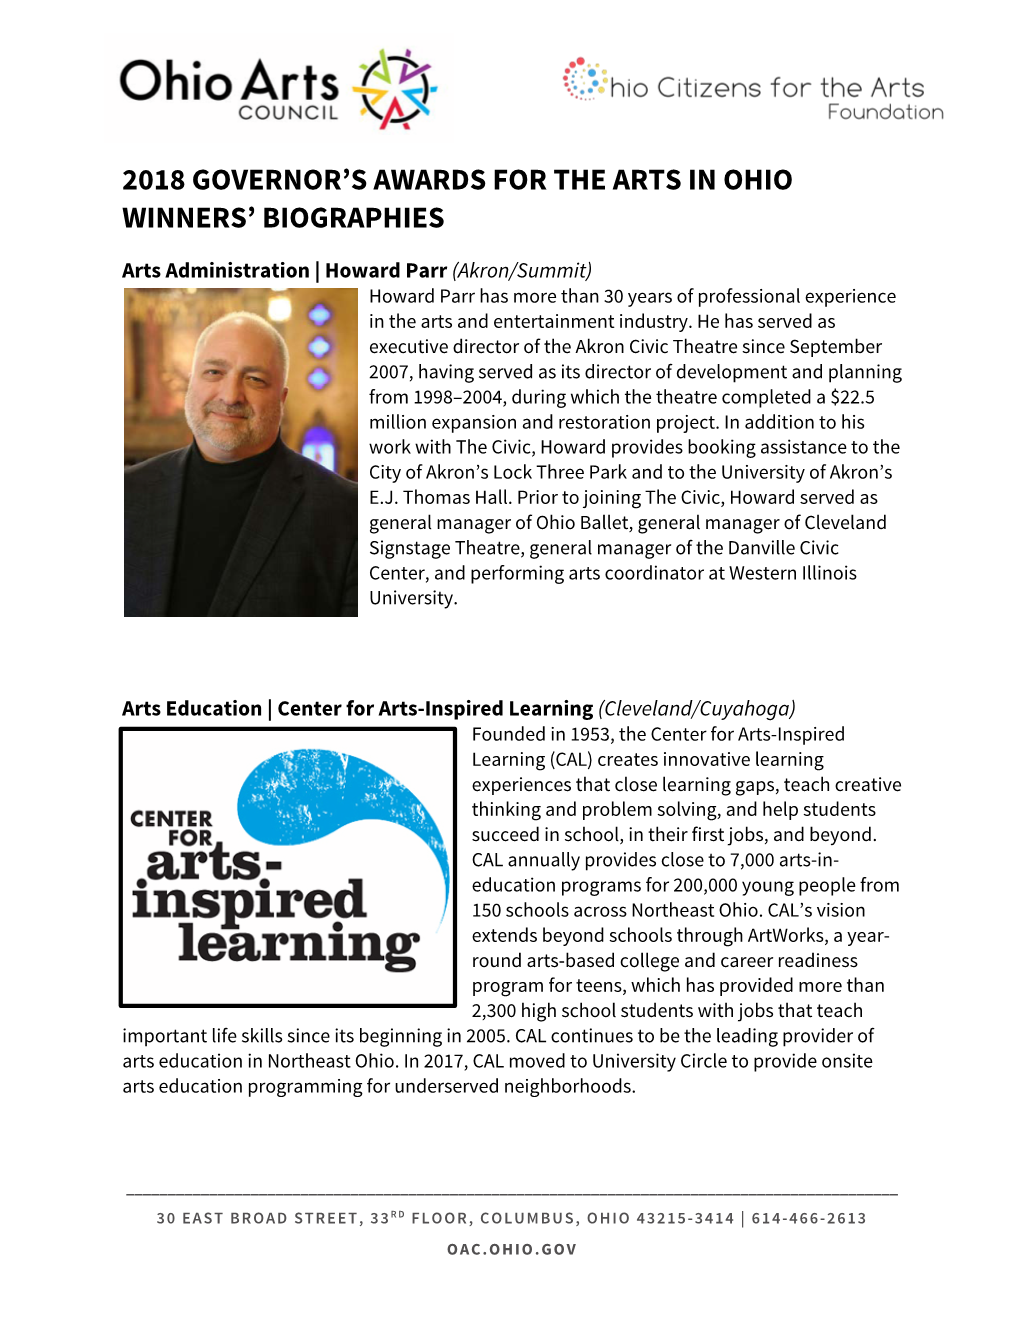 2018 Governor's Awards for the Arts in Ohio Winners